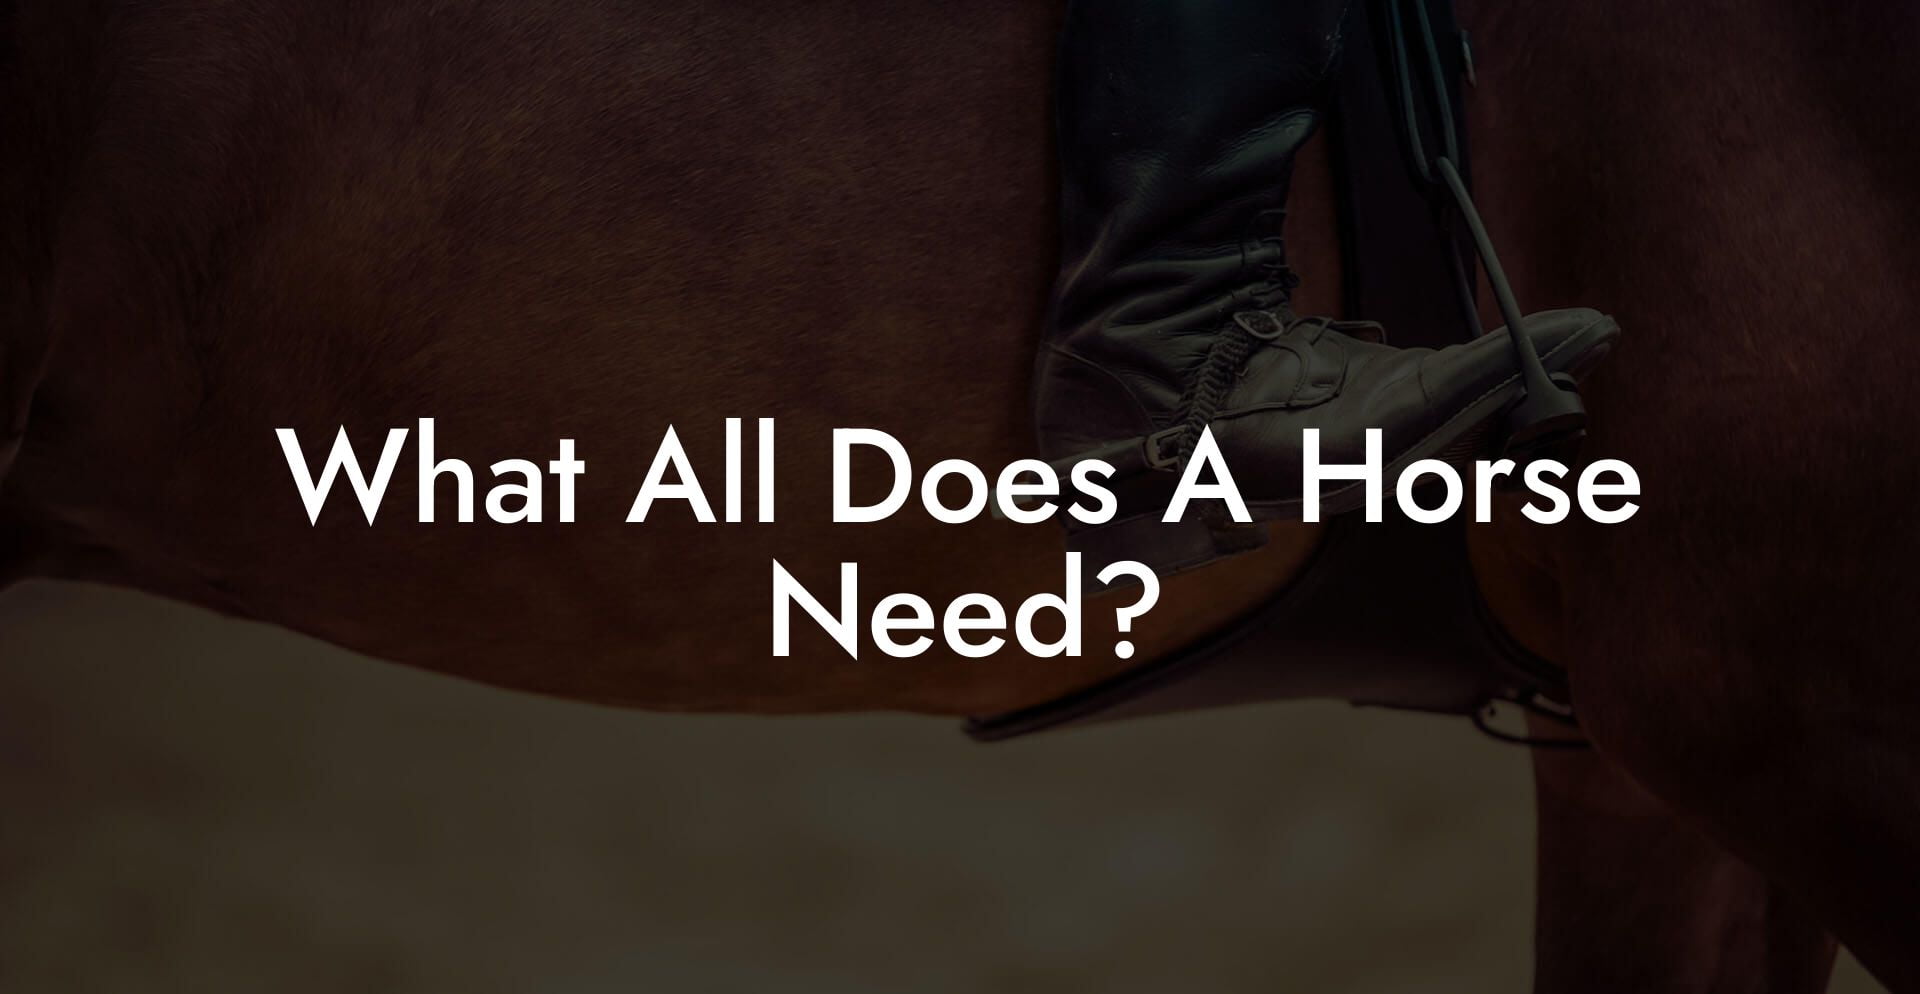 What All Does A Horse Need?